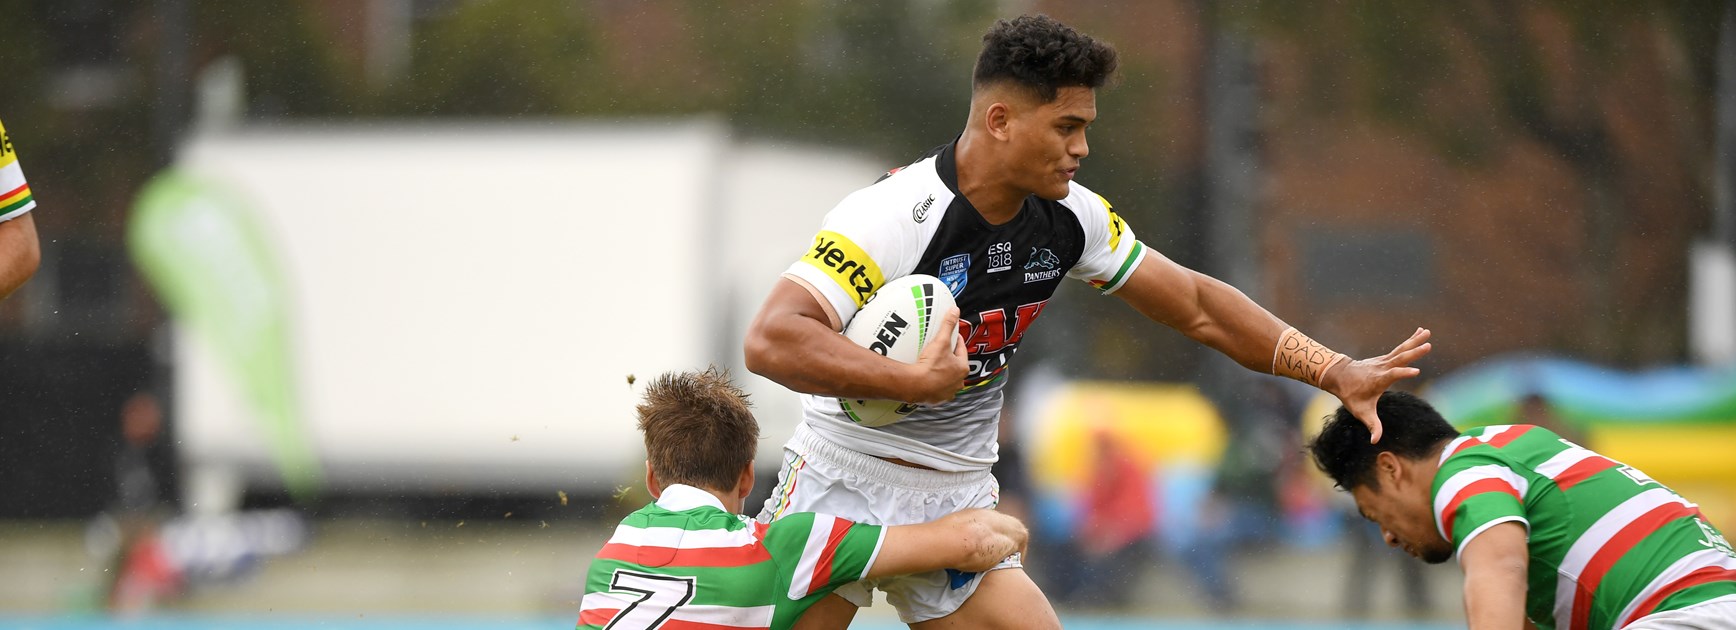 Team in Focus | Penrith Panthers